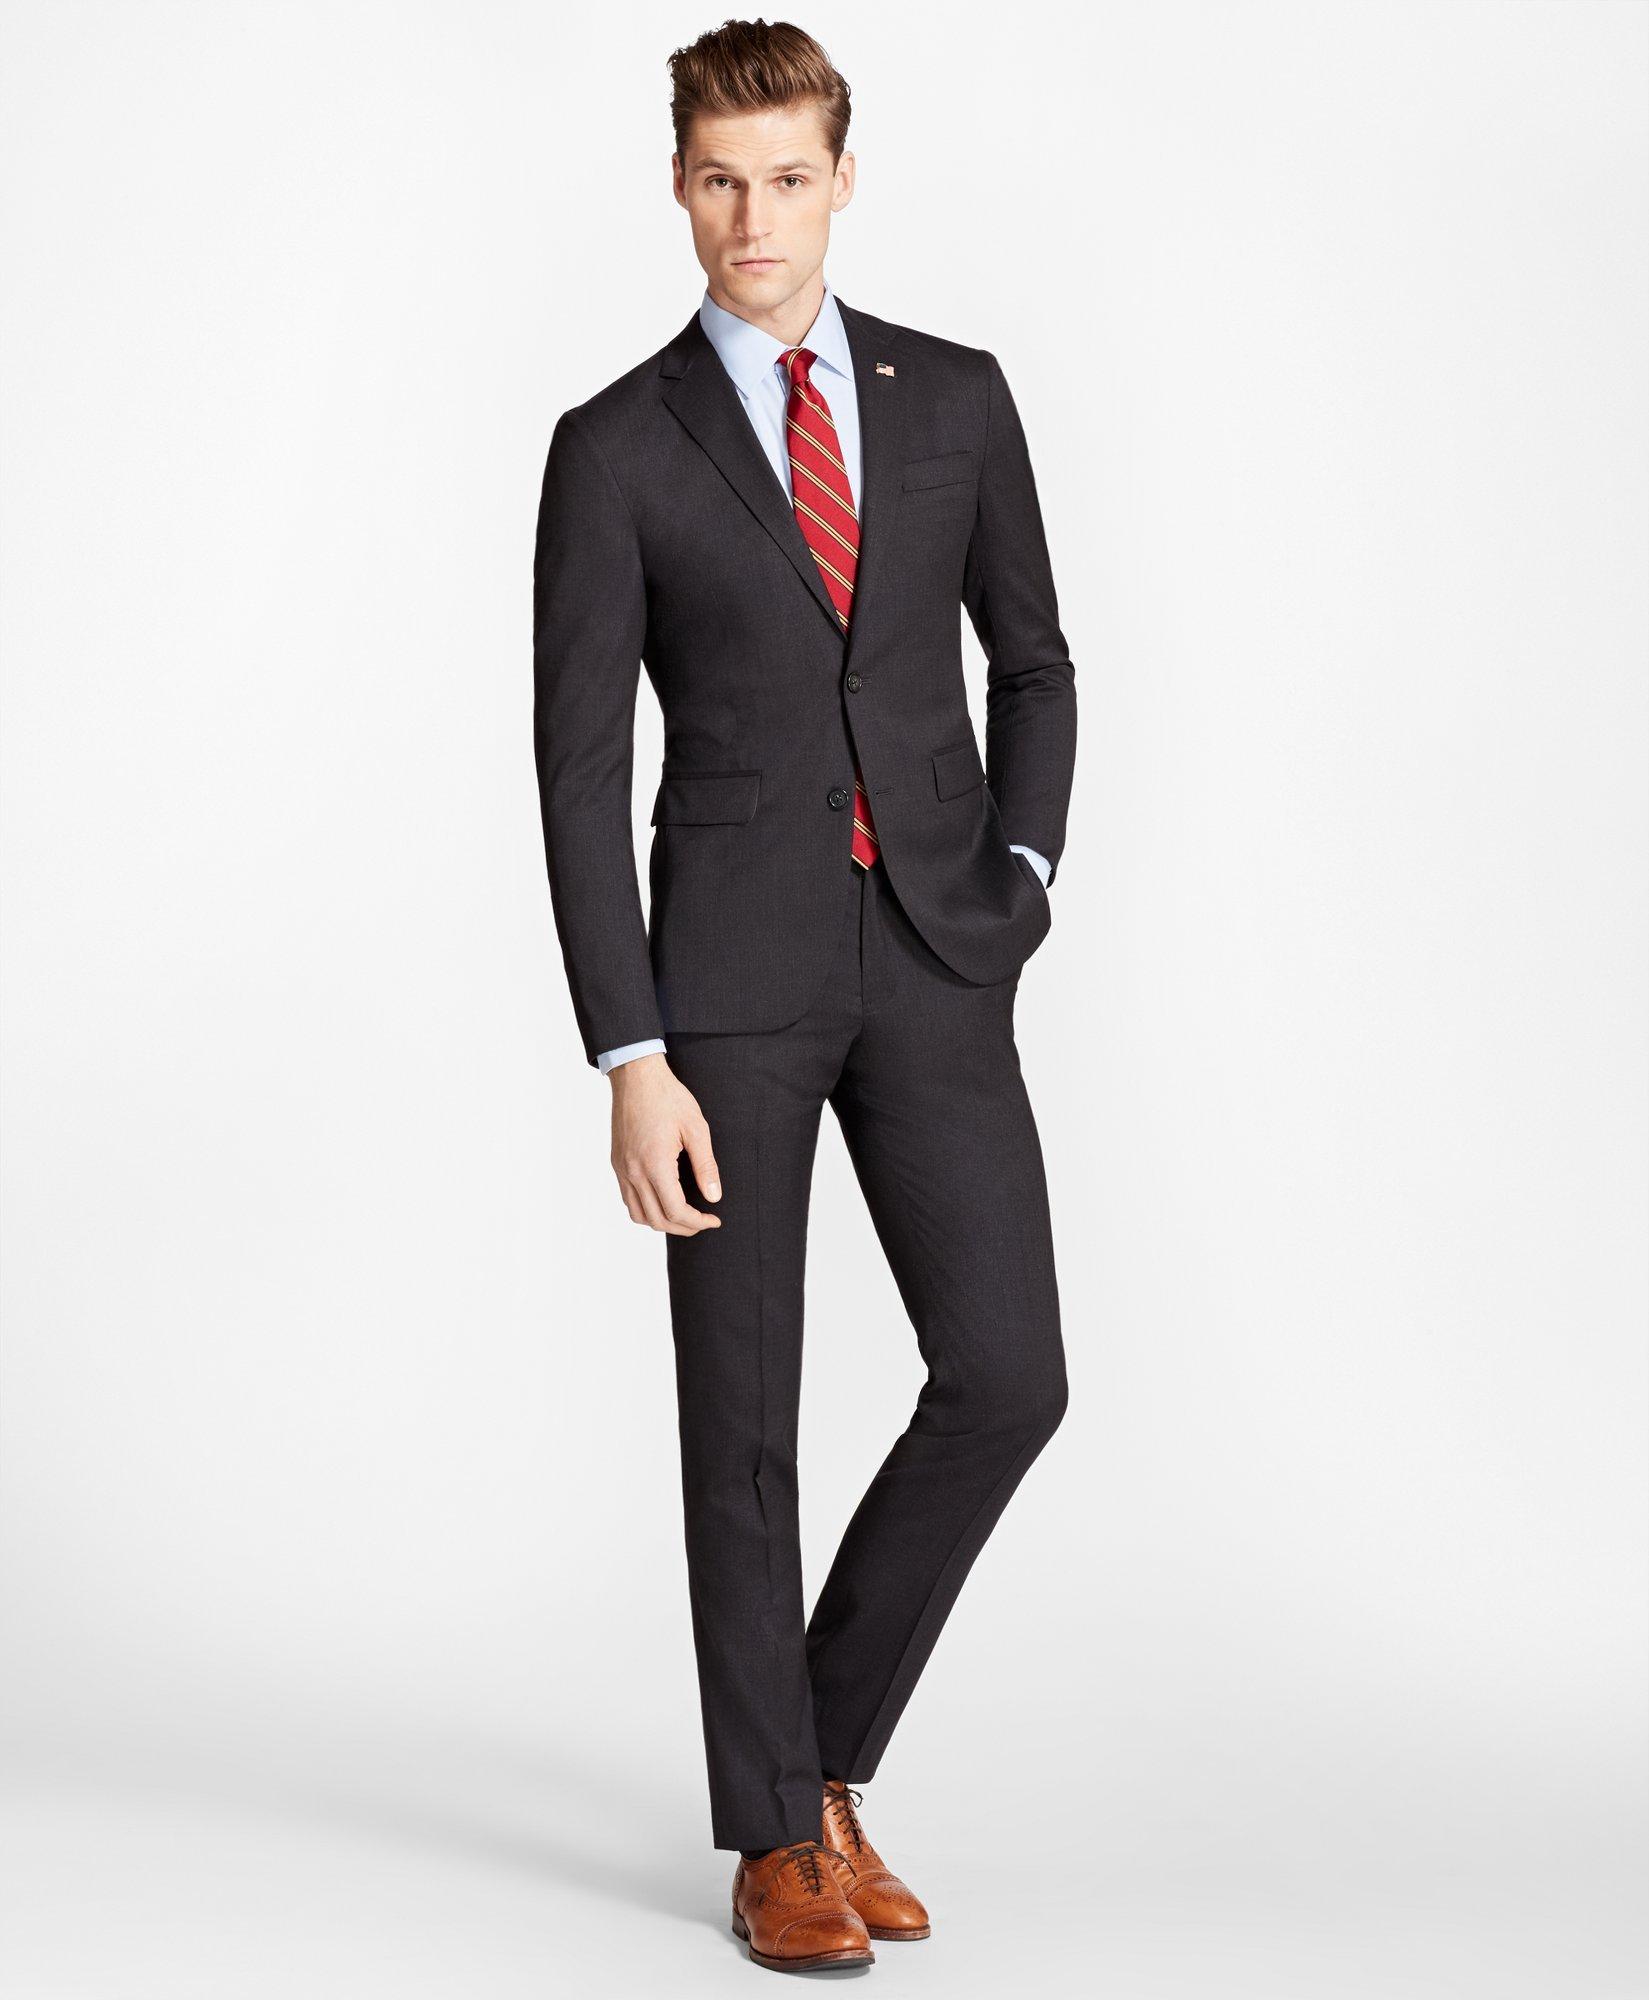 Brooks Brothers Slim Fit Stretch Wool Two-button 1818 Suit | Charcoal | Size 44 Regular